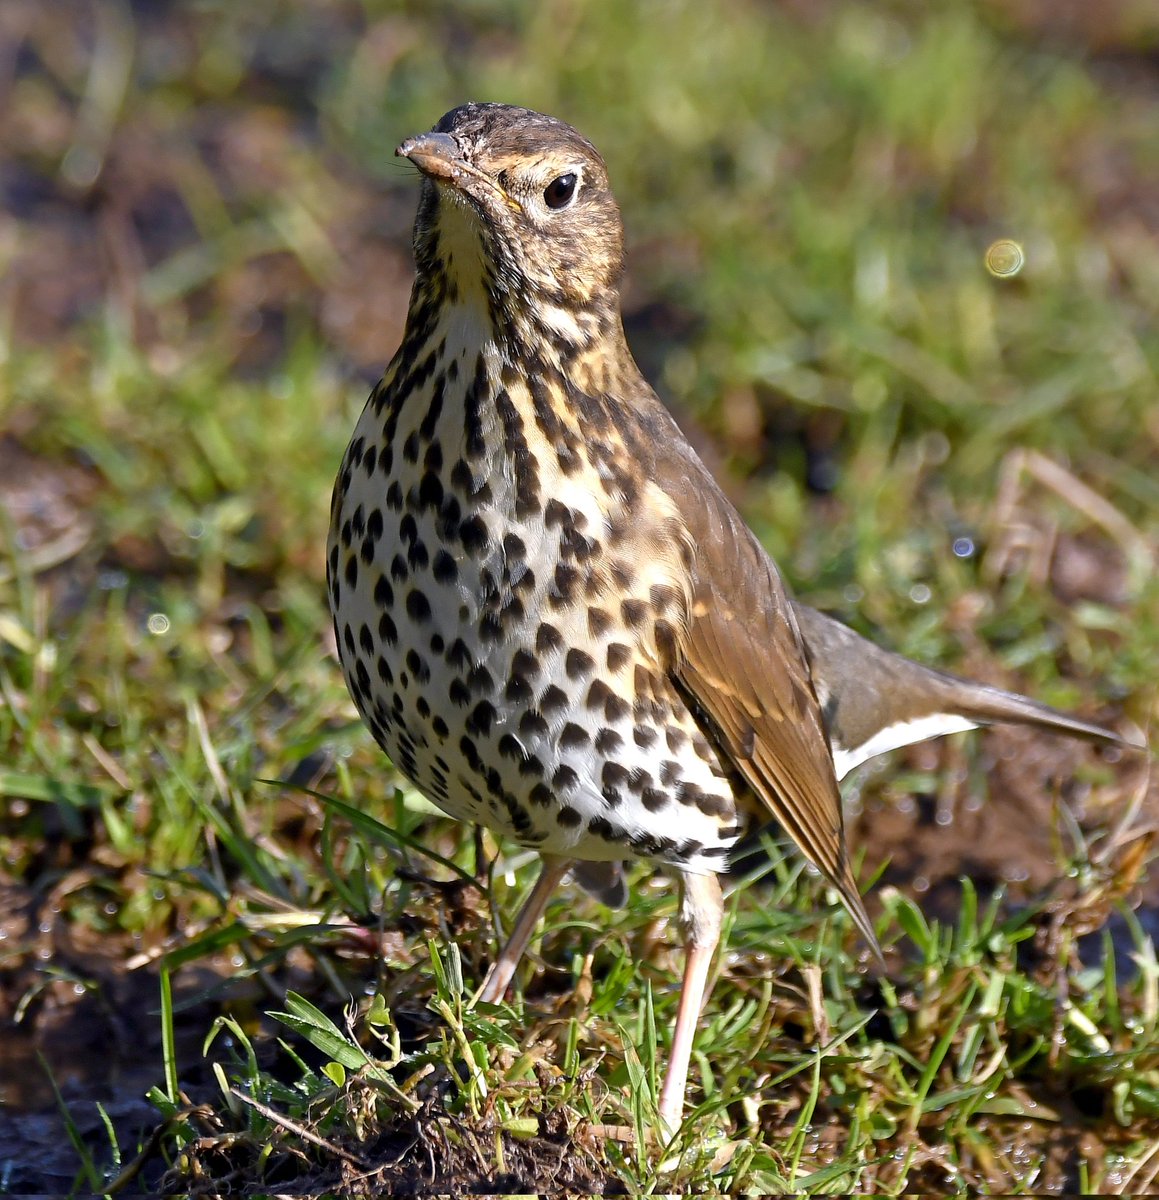 Such a shame that you don't see many Song Thrushes anymore. 😔 They were very common when I was a kid growing up in Kent. When did you last see a Song Thrush? 🐦❤️